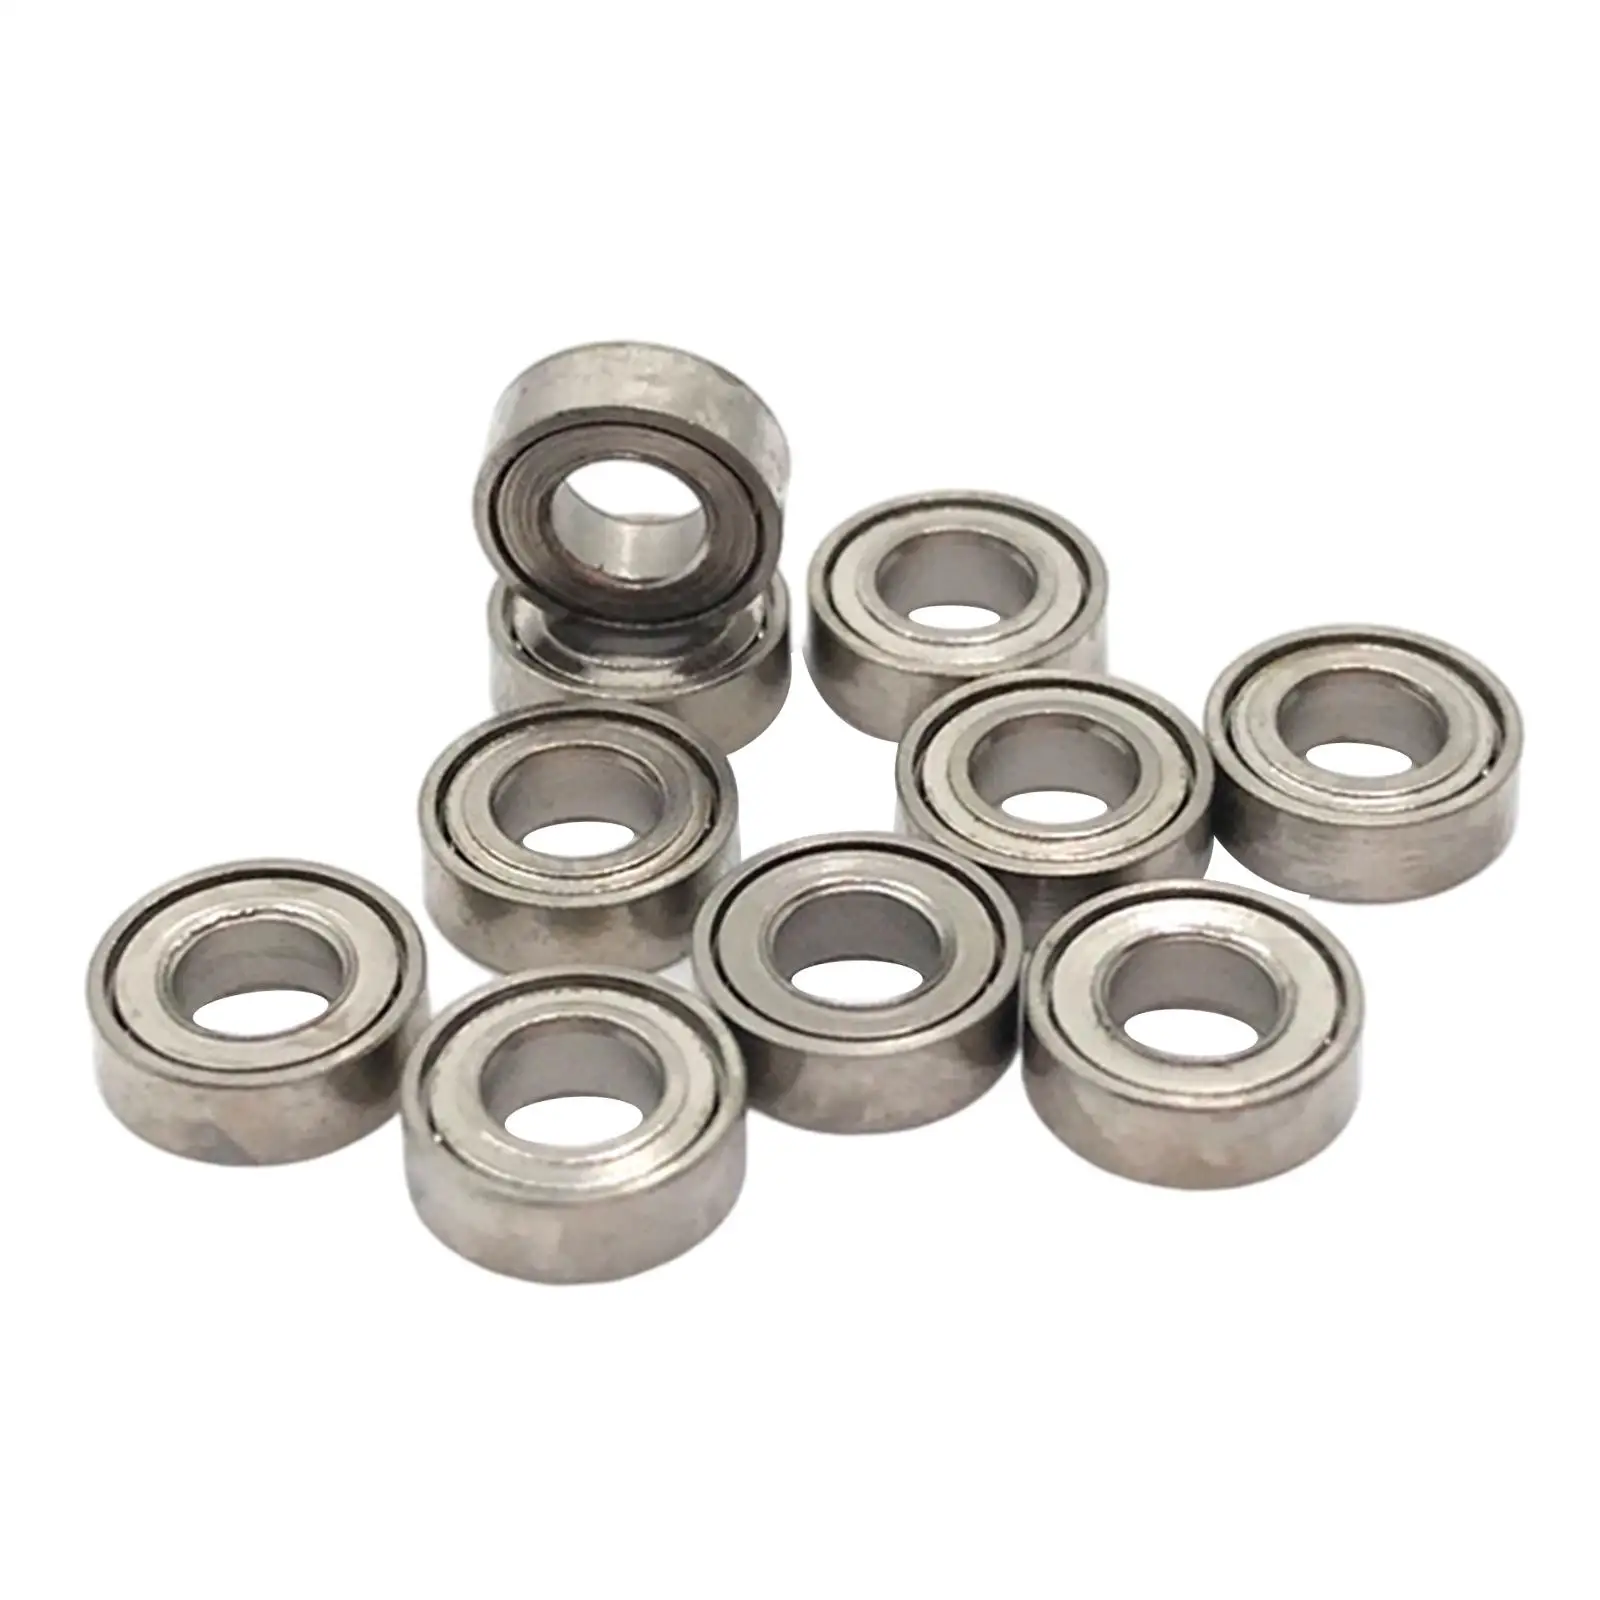 Repalcement Metal 3x6x2mm Ball Bearing Spare Accessory for WPL D12 C14 C24 C34 C44 B16 B24 Part